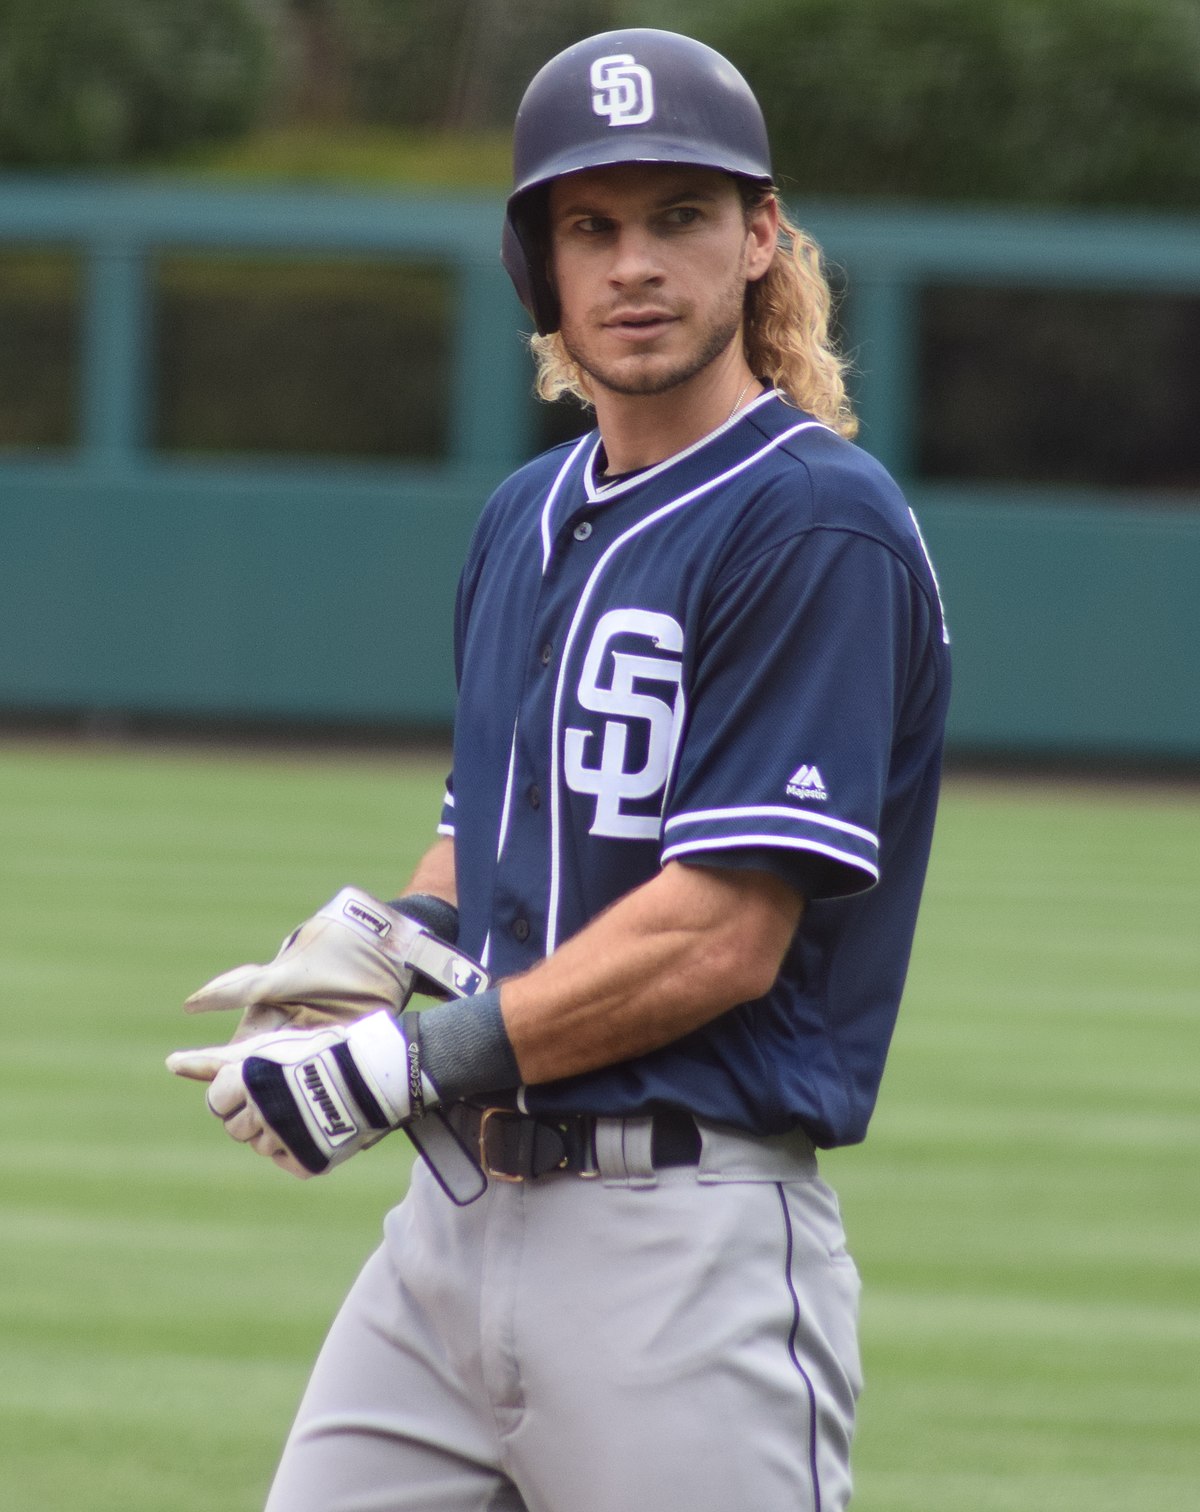 Wil Myers impresses in his 3rd base debut